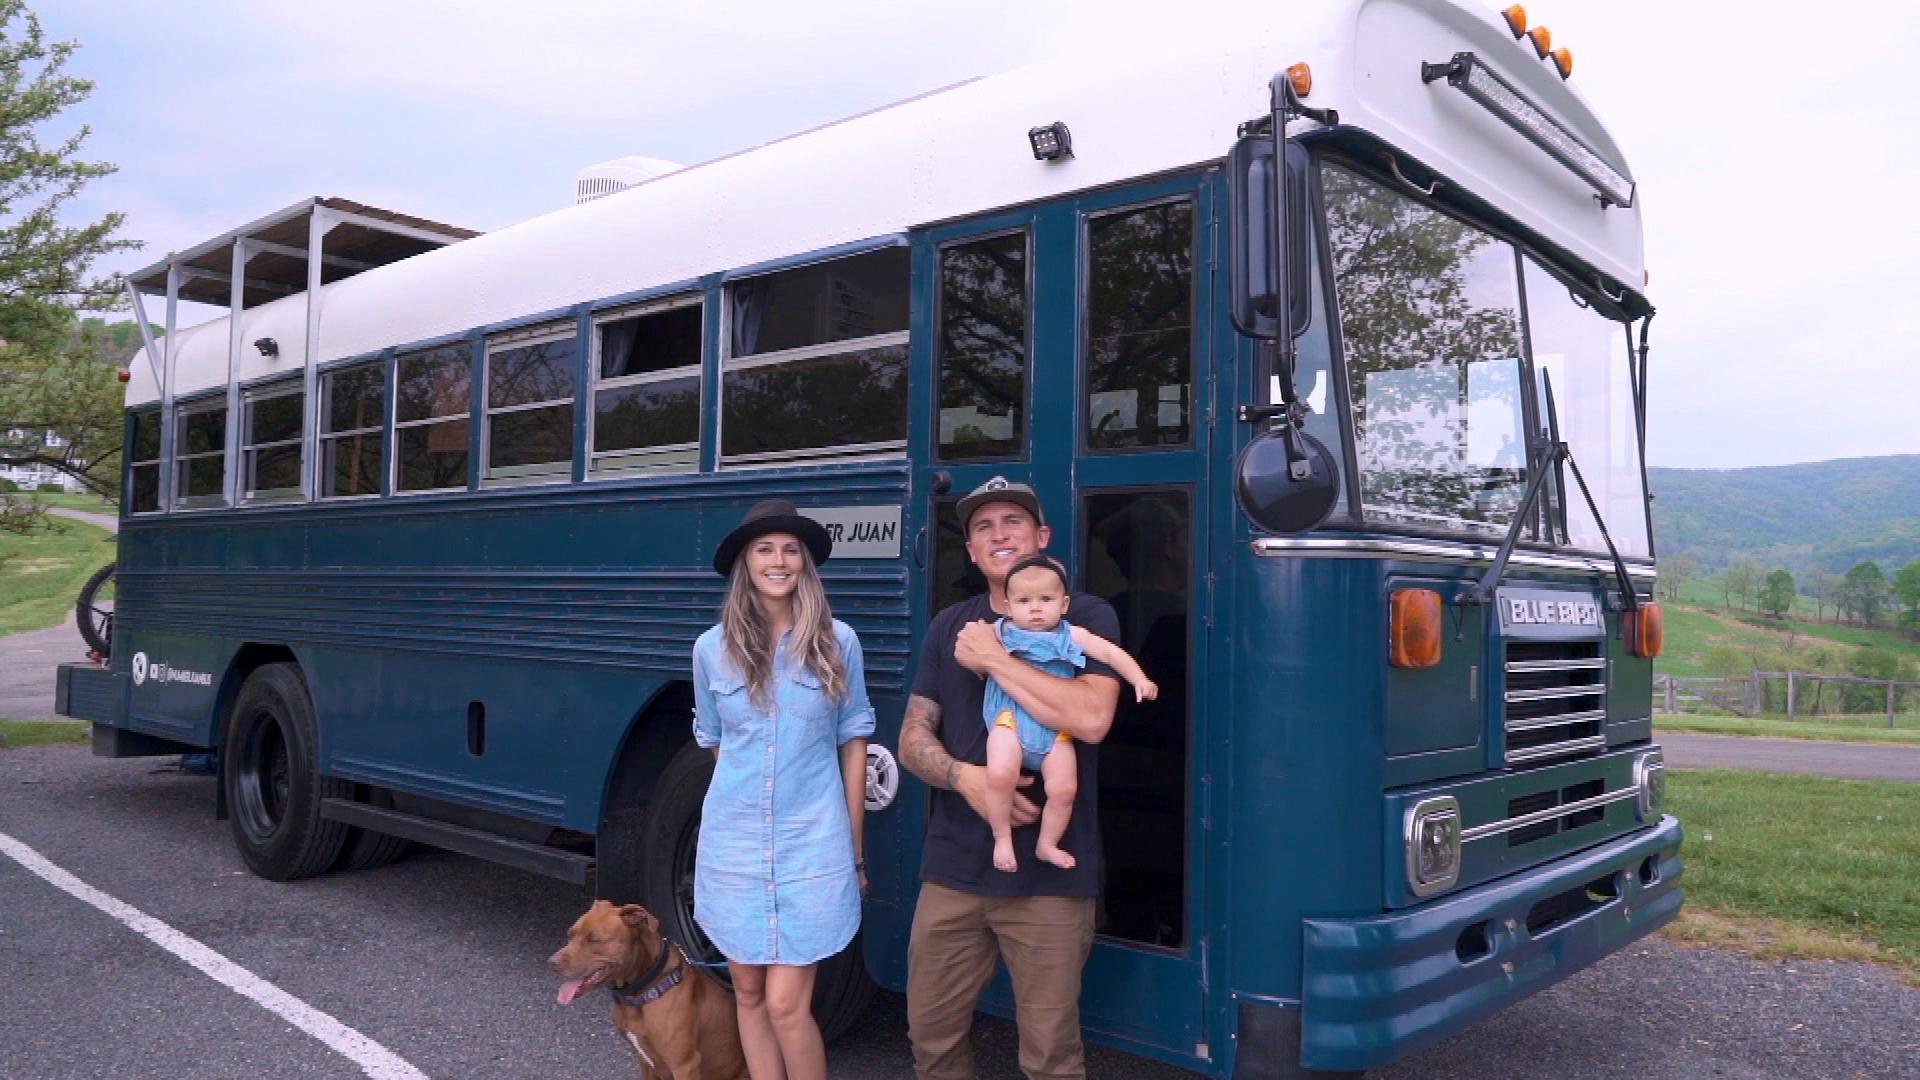 Tour The Tiny Home On Wheels With A Roofdeck Couple Built In Images, Photos, Reviews